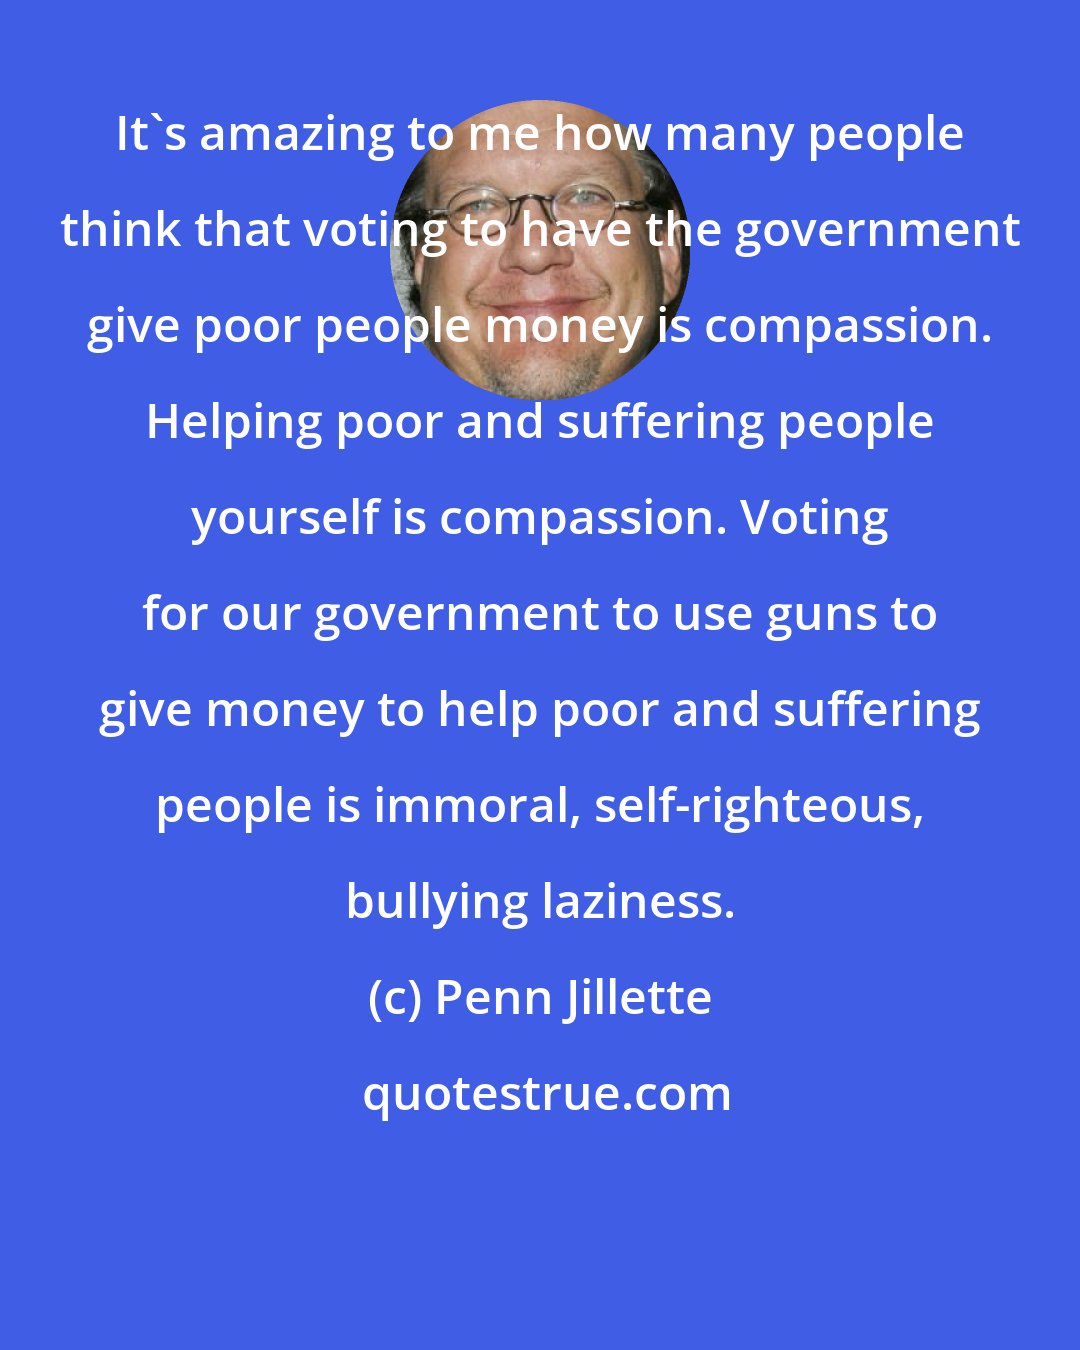 Penn Jillette: It's amazing to me how many people think that voting to have the government give poor people money is compassion. Helping poor and suffering people yourself is compassion. Voting for our government to use guns to give money to help poor and suffering people is immoral, self-righteous, bullying laziness.